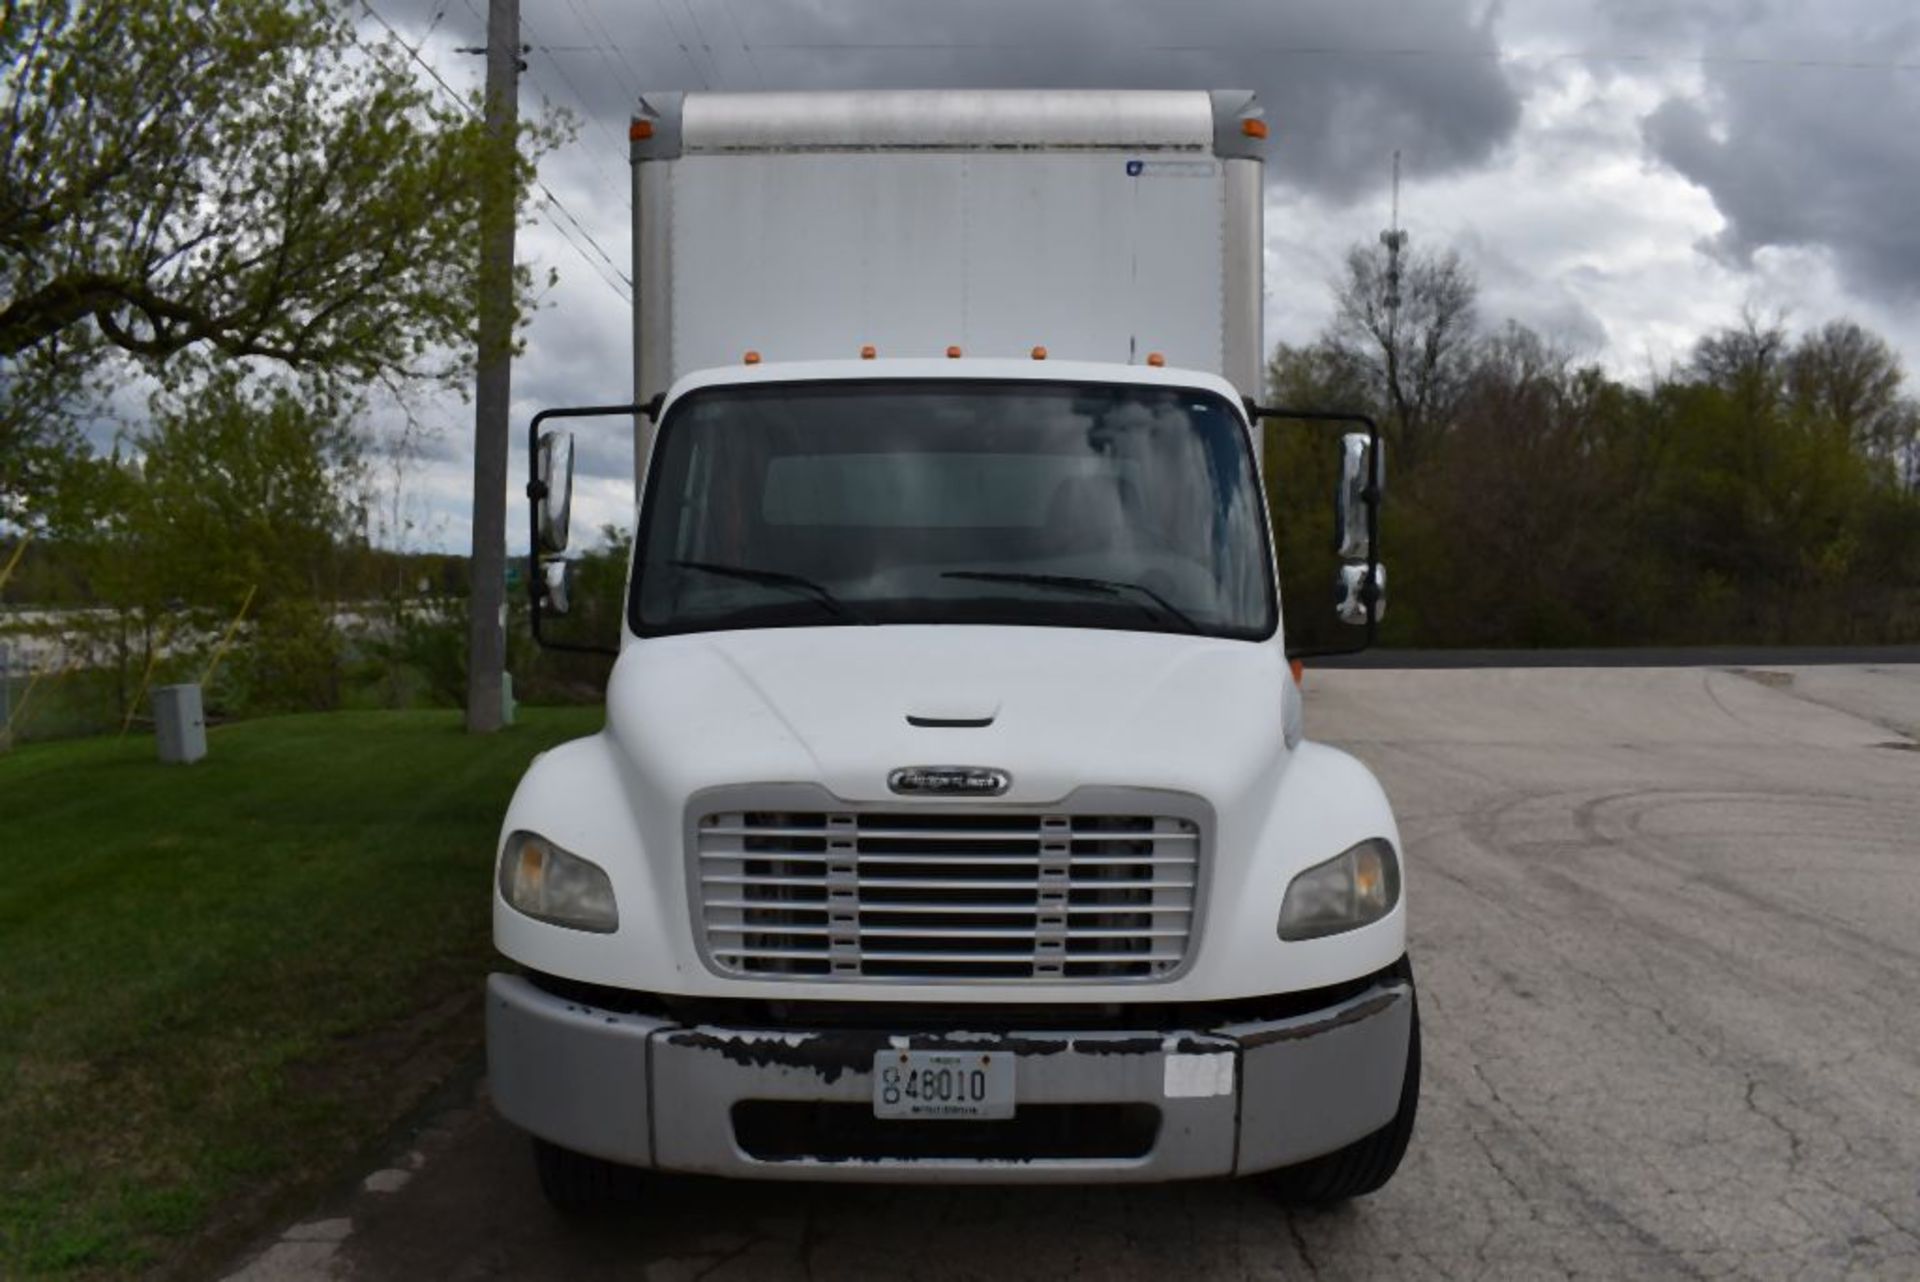 (2008) FREIGHTLINER SINGLE AXLE 20' STRAIGHT BOX VAN, MODEL: BUSINESS CLASS M2, 135,820 MILES, - Image 12 of 16